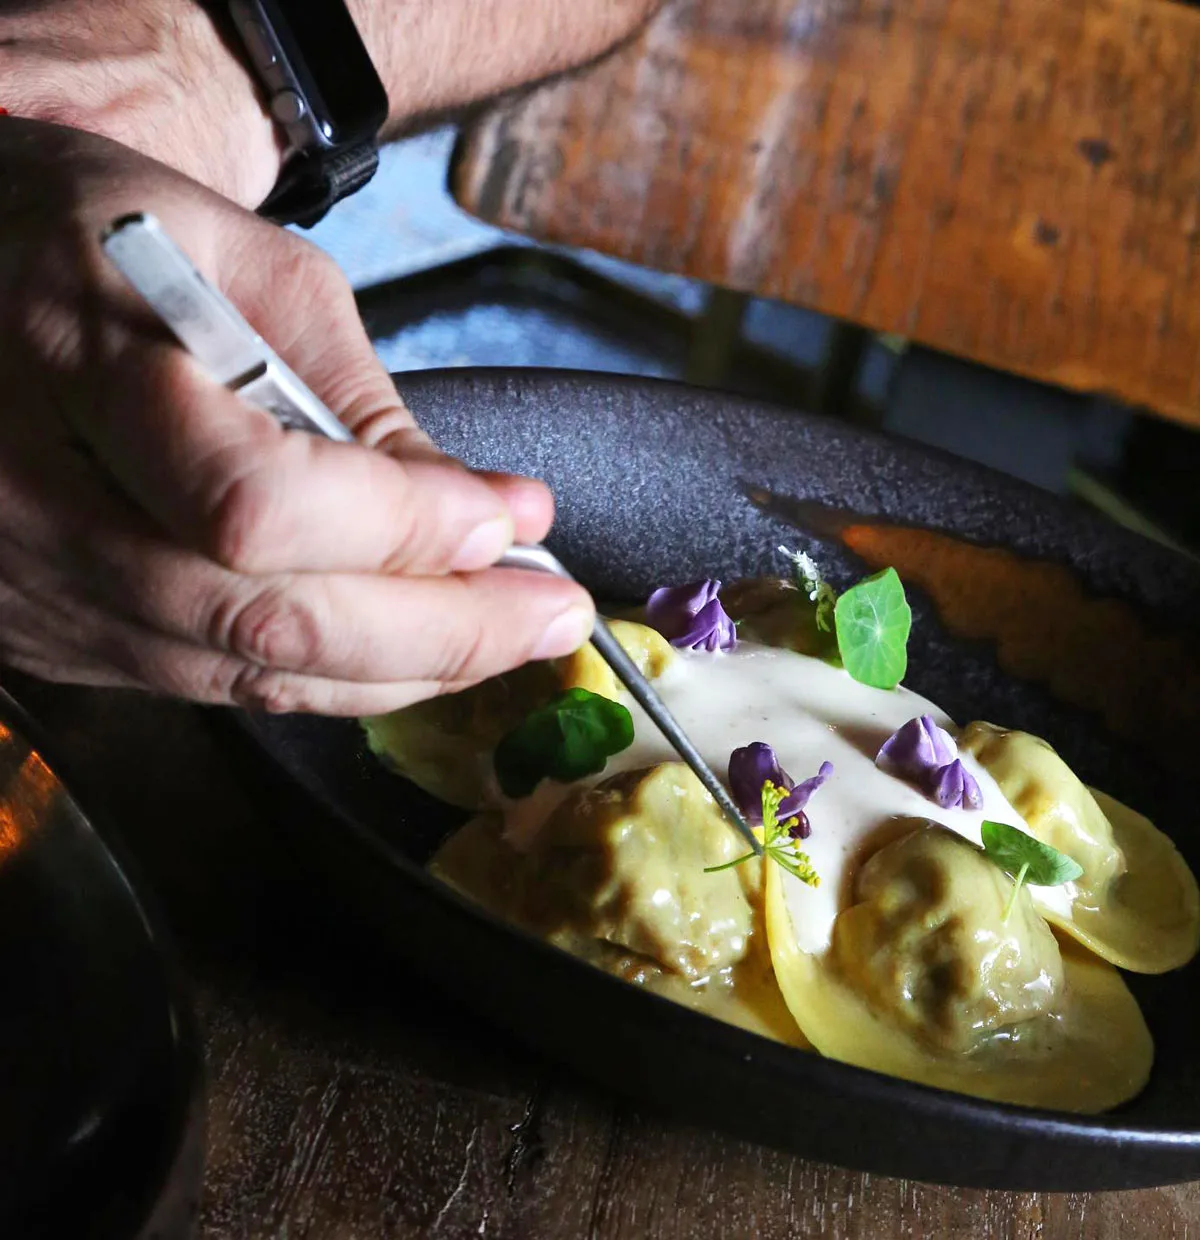 Putting the finishing touches onto a cappelletti dish at Romeo & Julieta, Cabo San Lucas